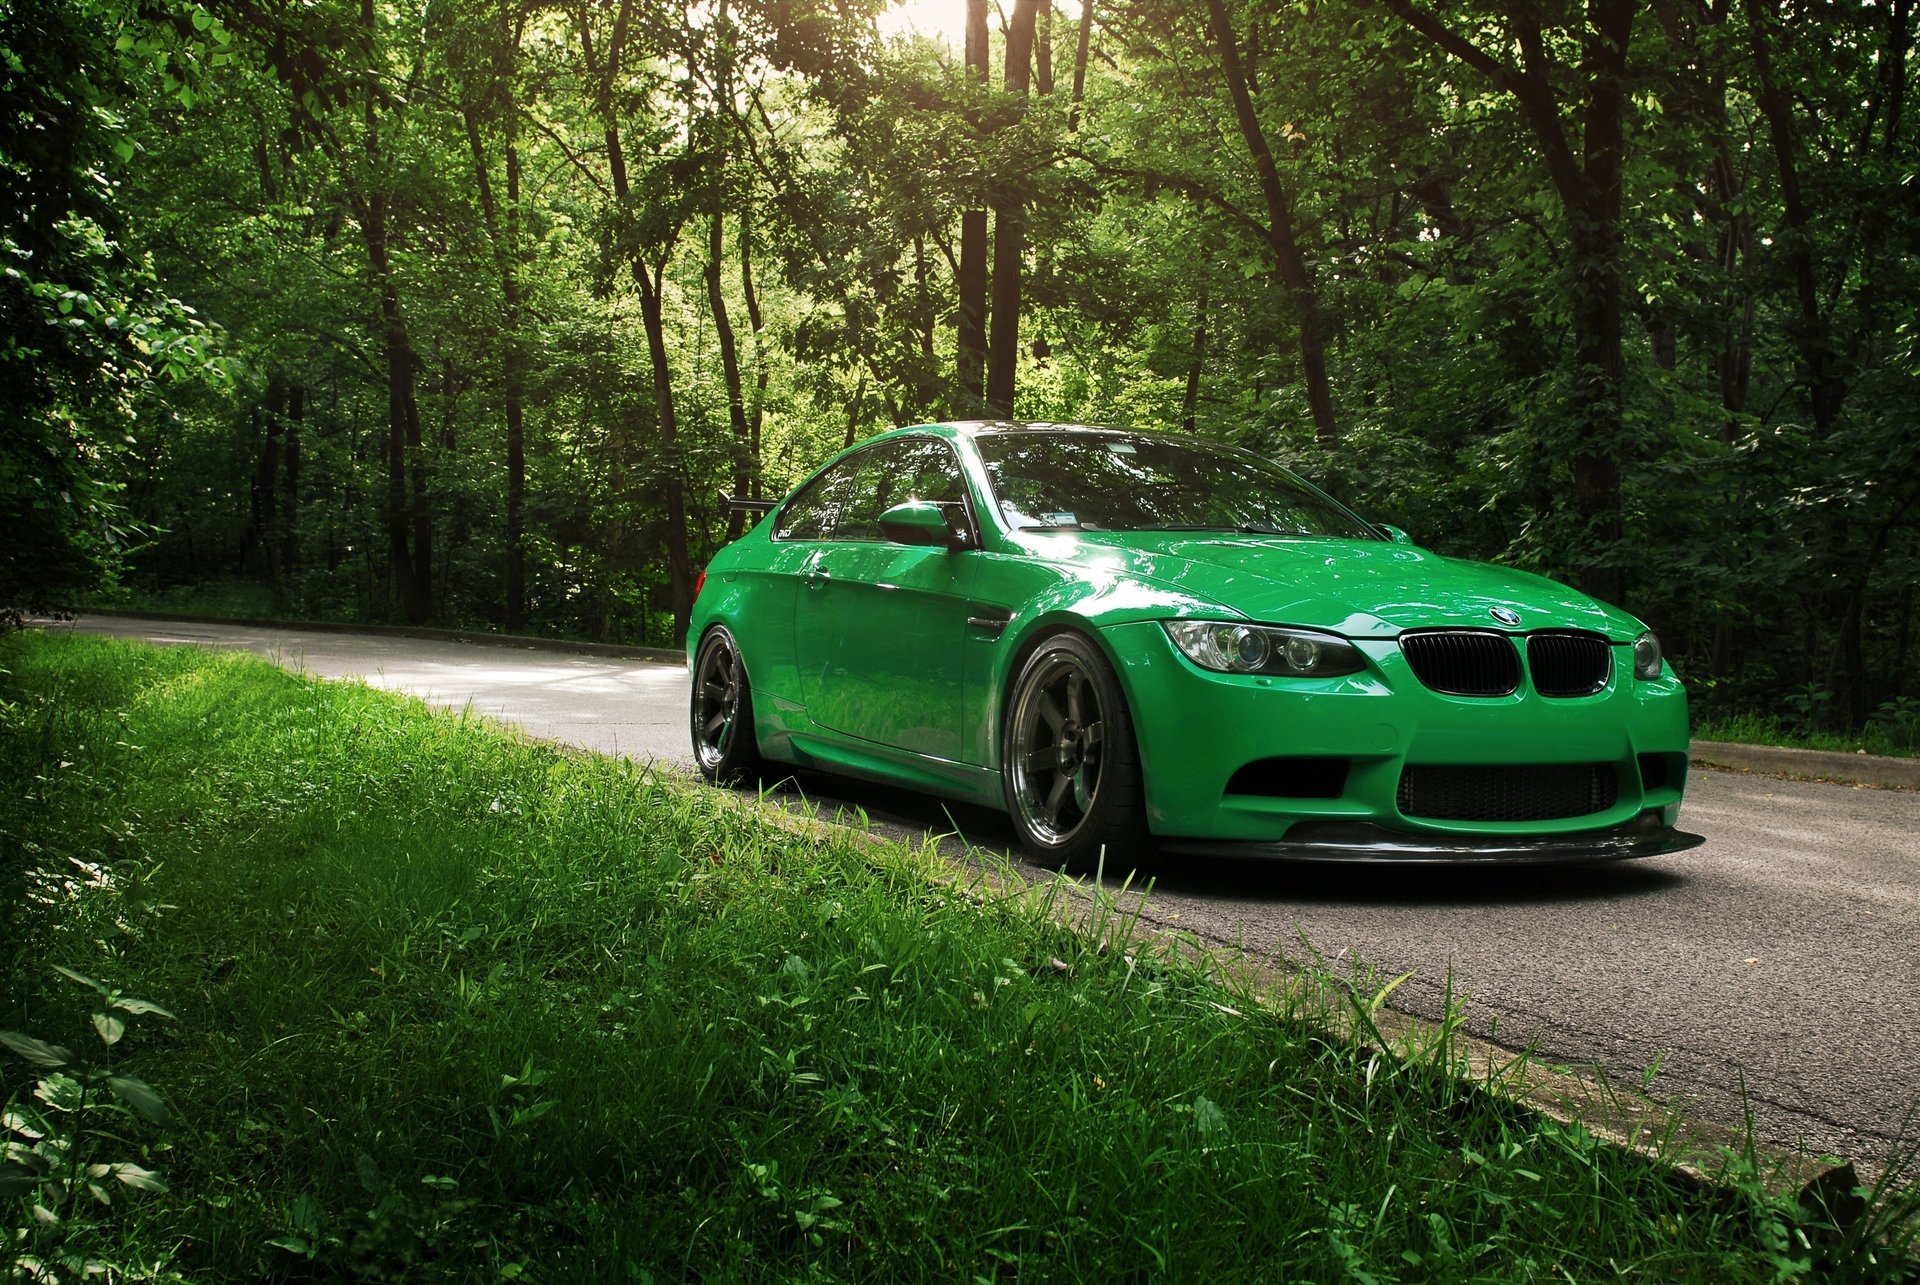 Photo of a car in green shades